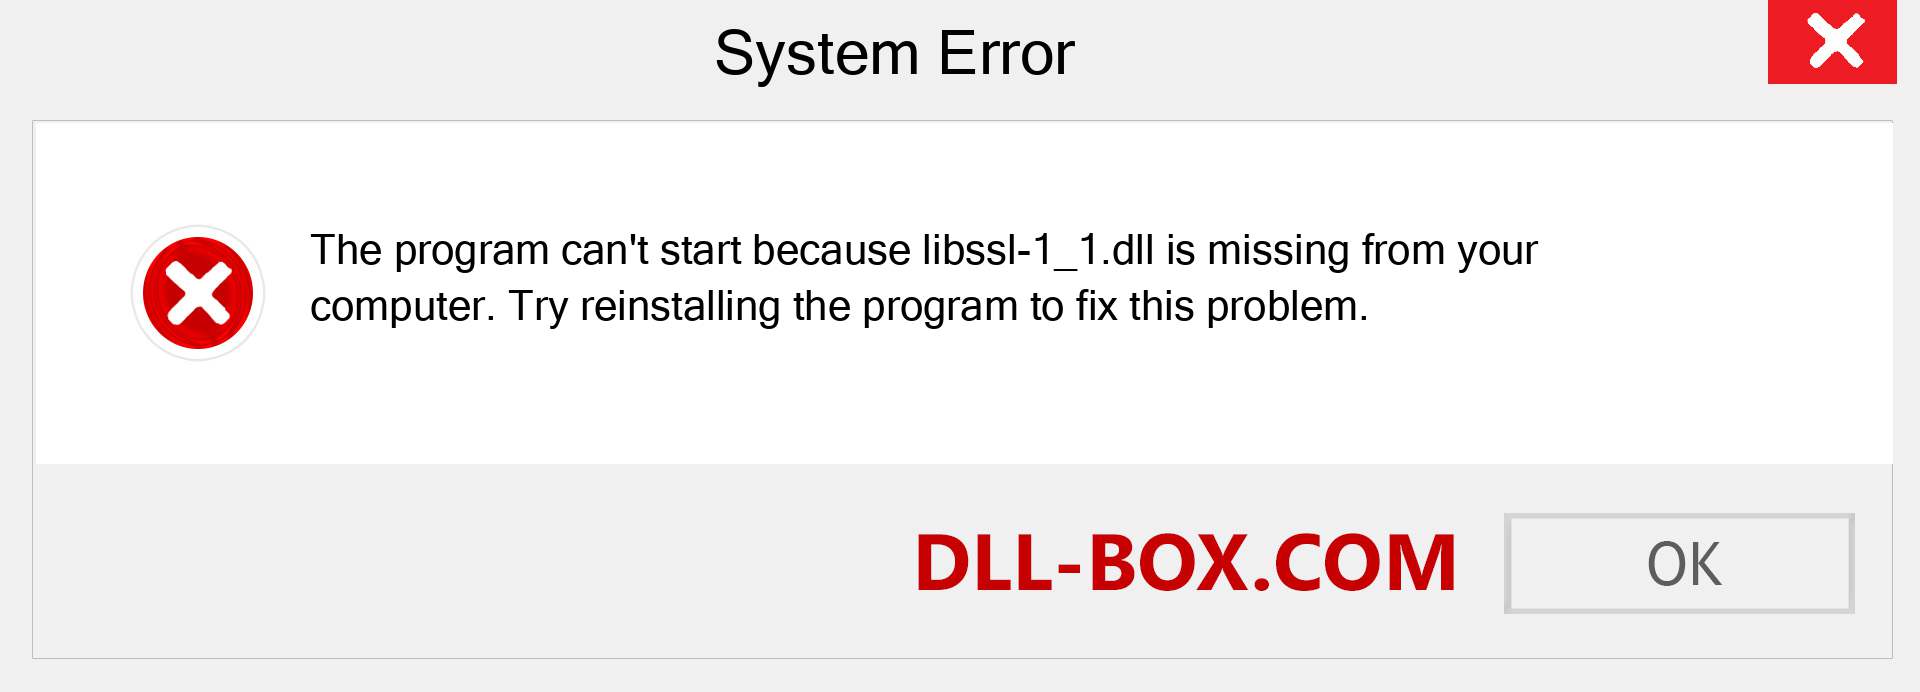  libssl-1_1.dll file is missing?. Download for Windows 7, 8, 10 - Fix  libssl-1_1 dll Missing Error on Windows, photos, images